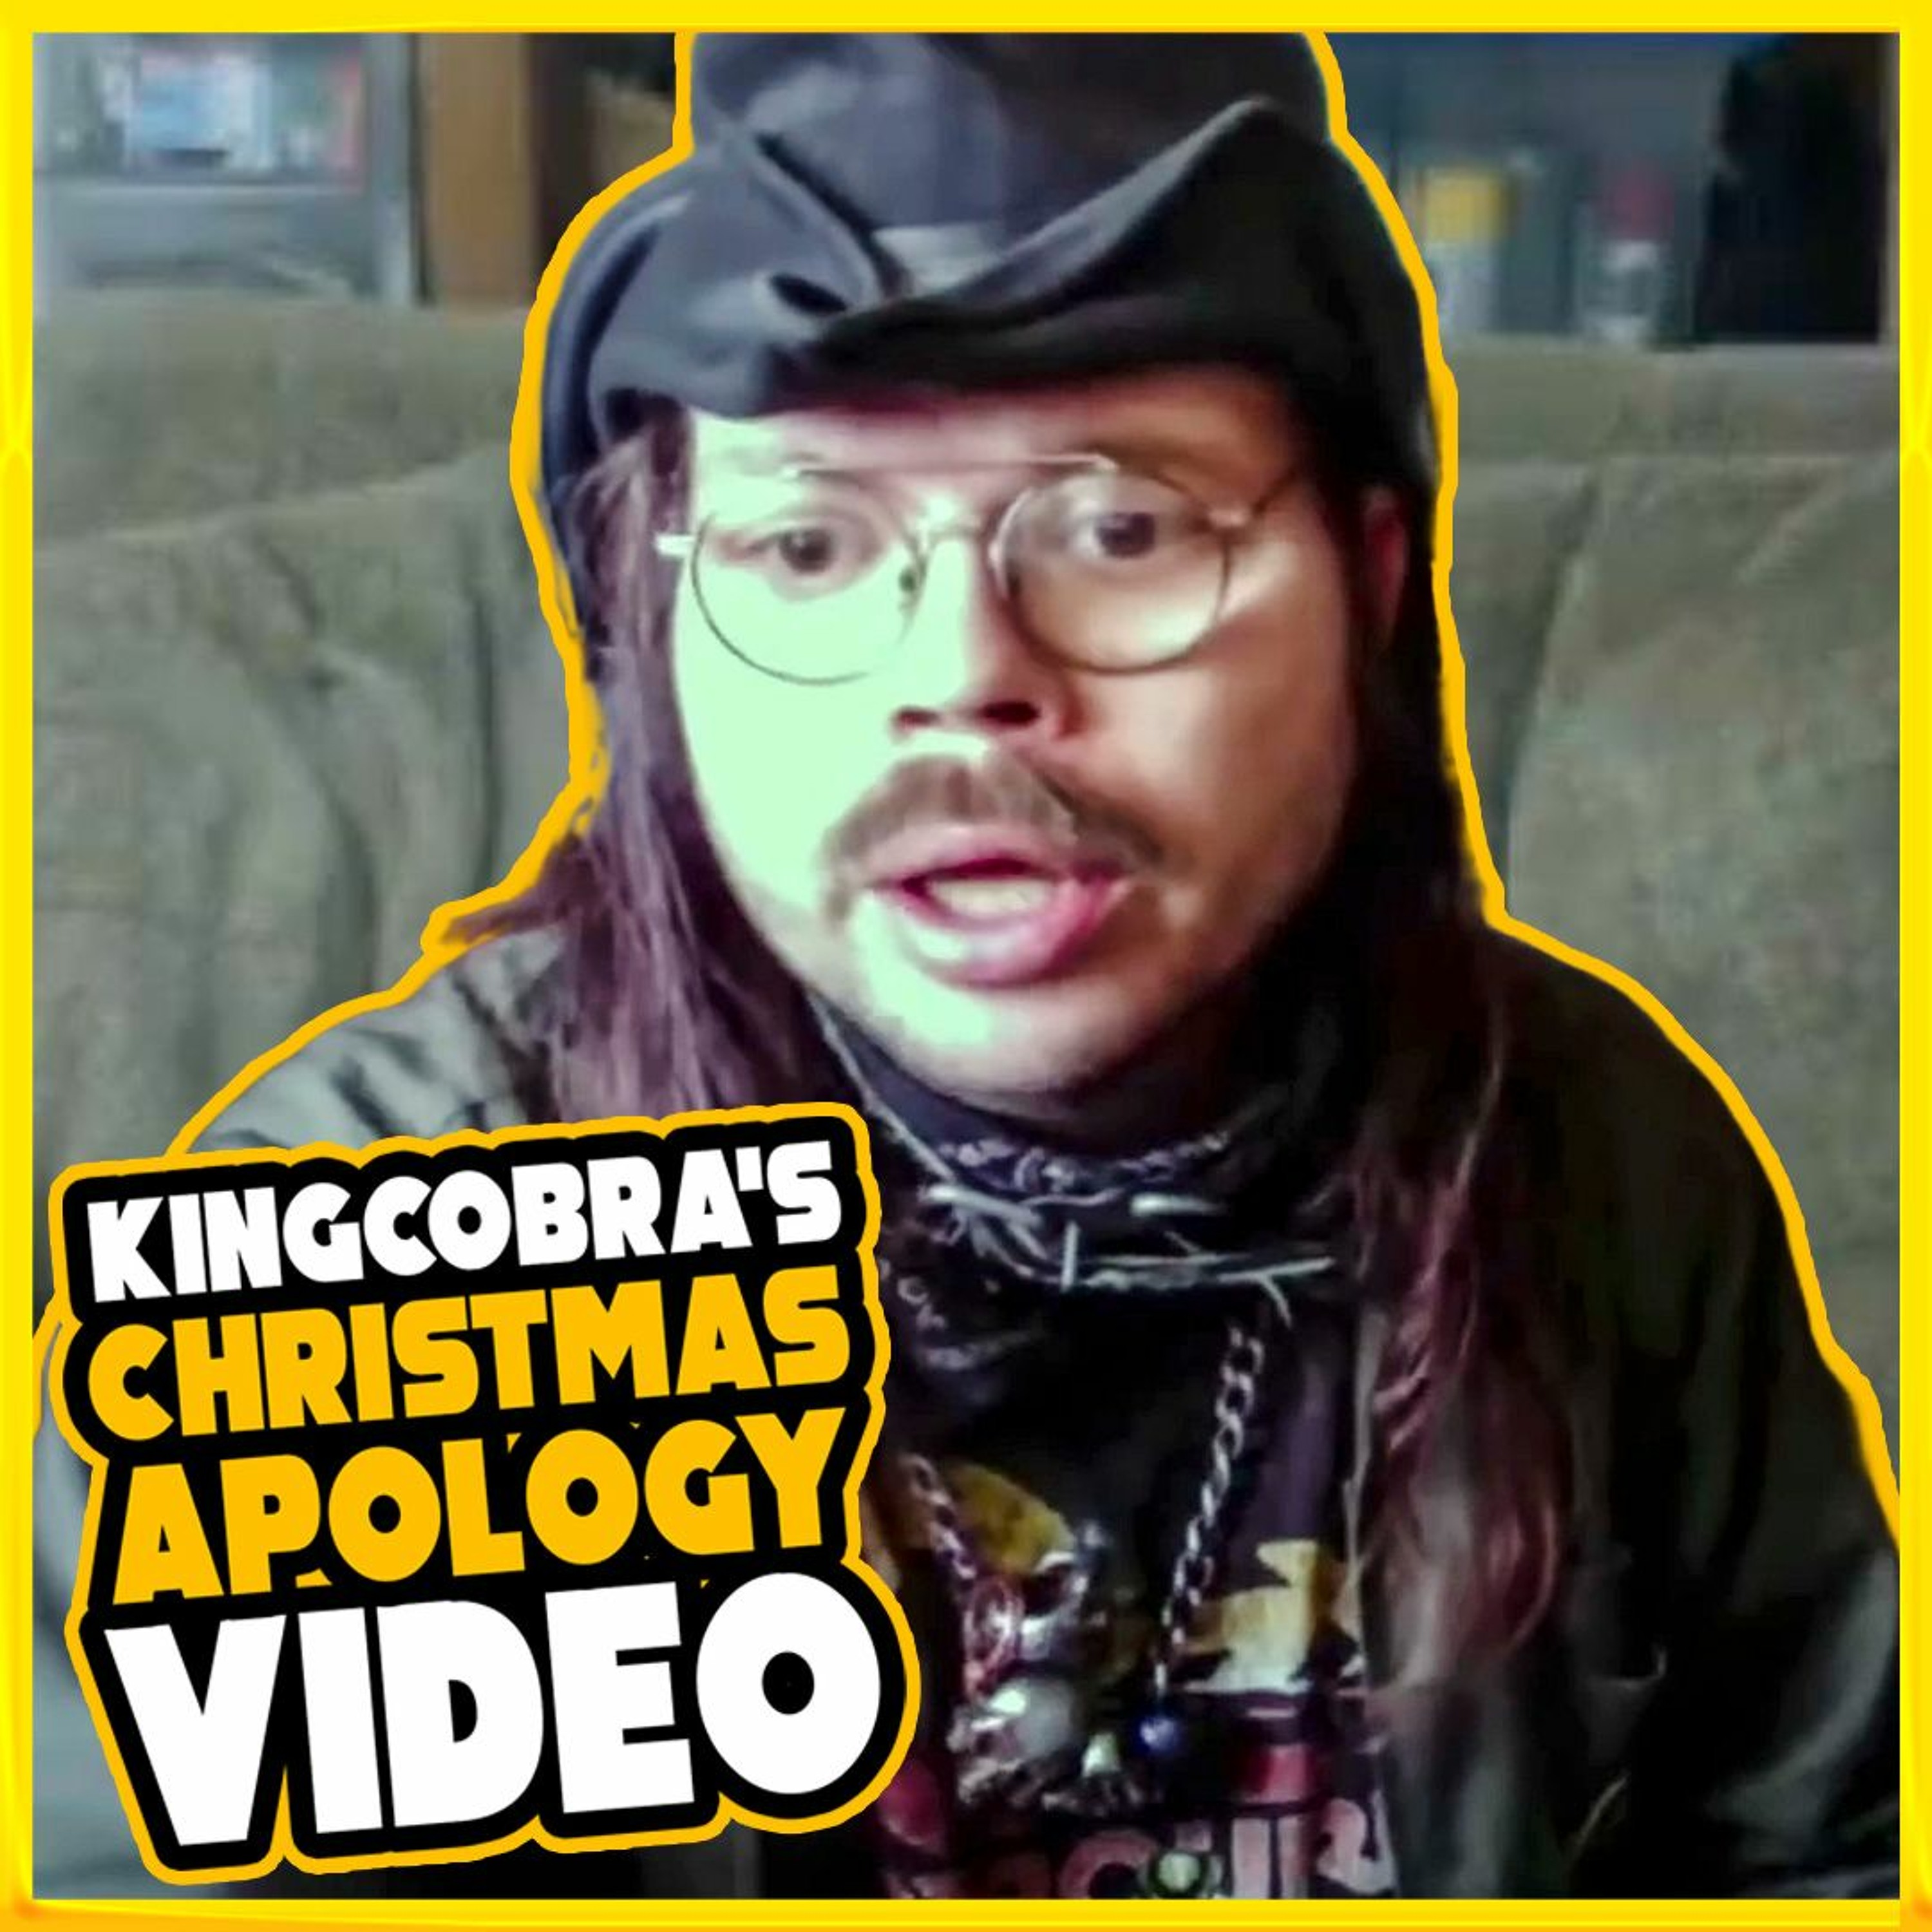 KingCobraJFS Issues APOLOGY to His Family - Piers Morgan vs Crowder - Tucker & Kevin Spacey | 1287